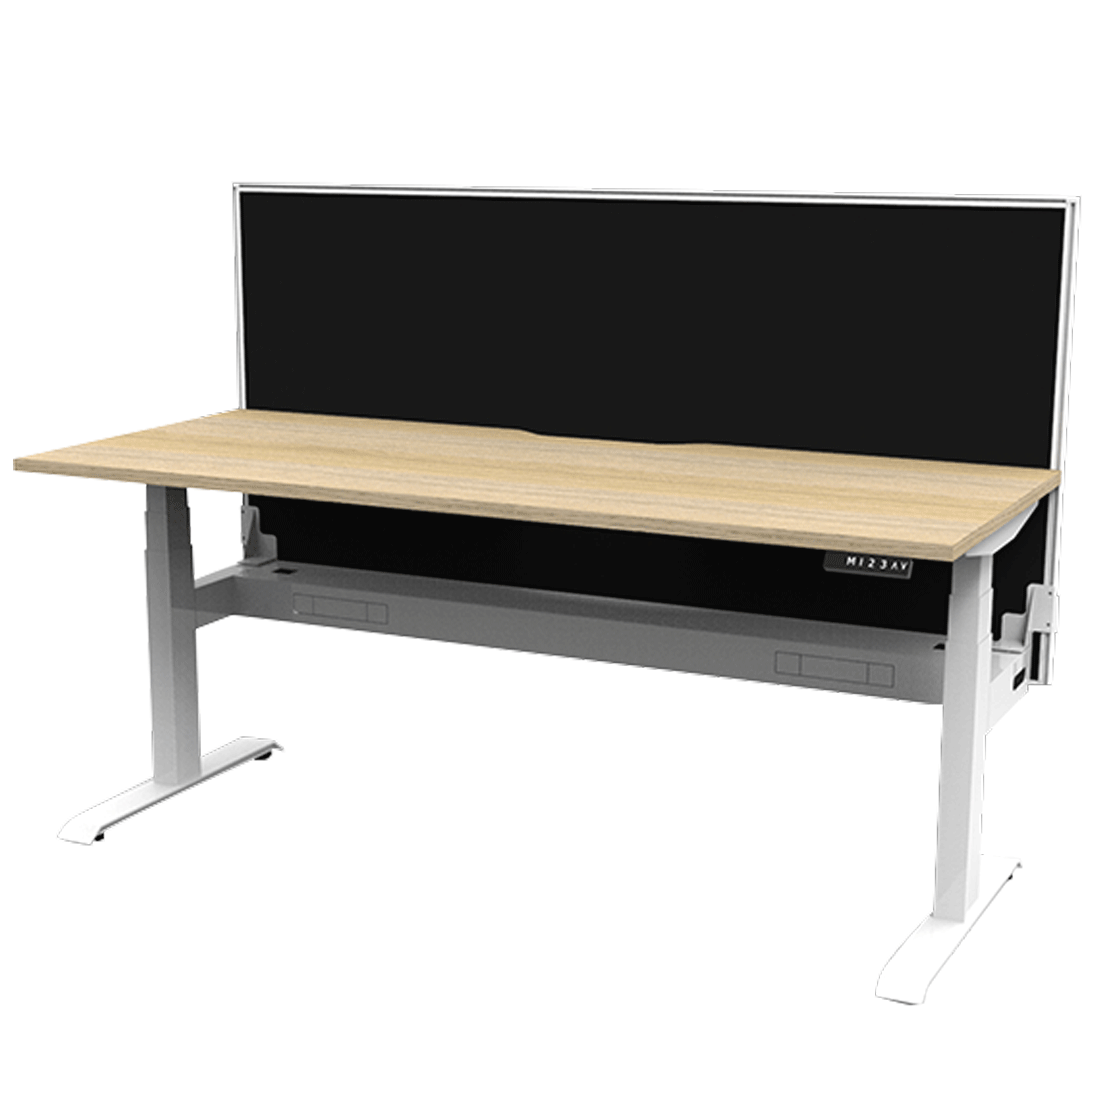 Boost Height Adjustable Desk + Cable Tray and Privacy Screen - switchoffice.com.au